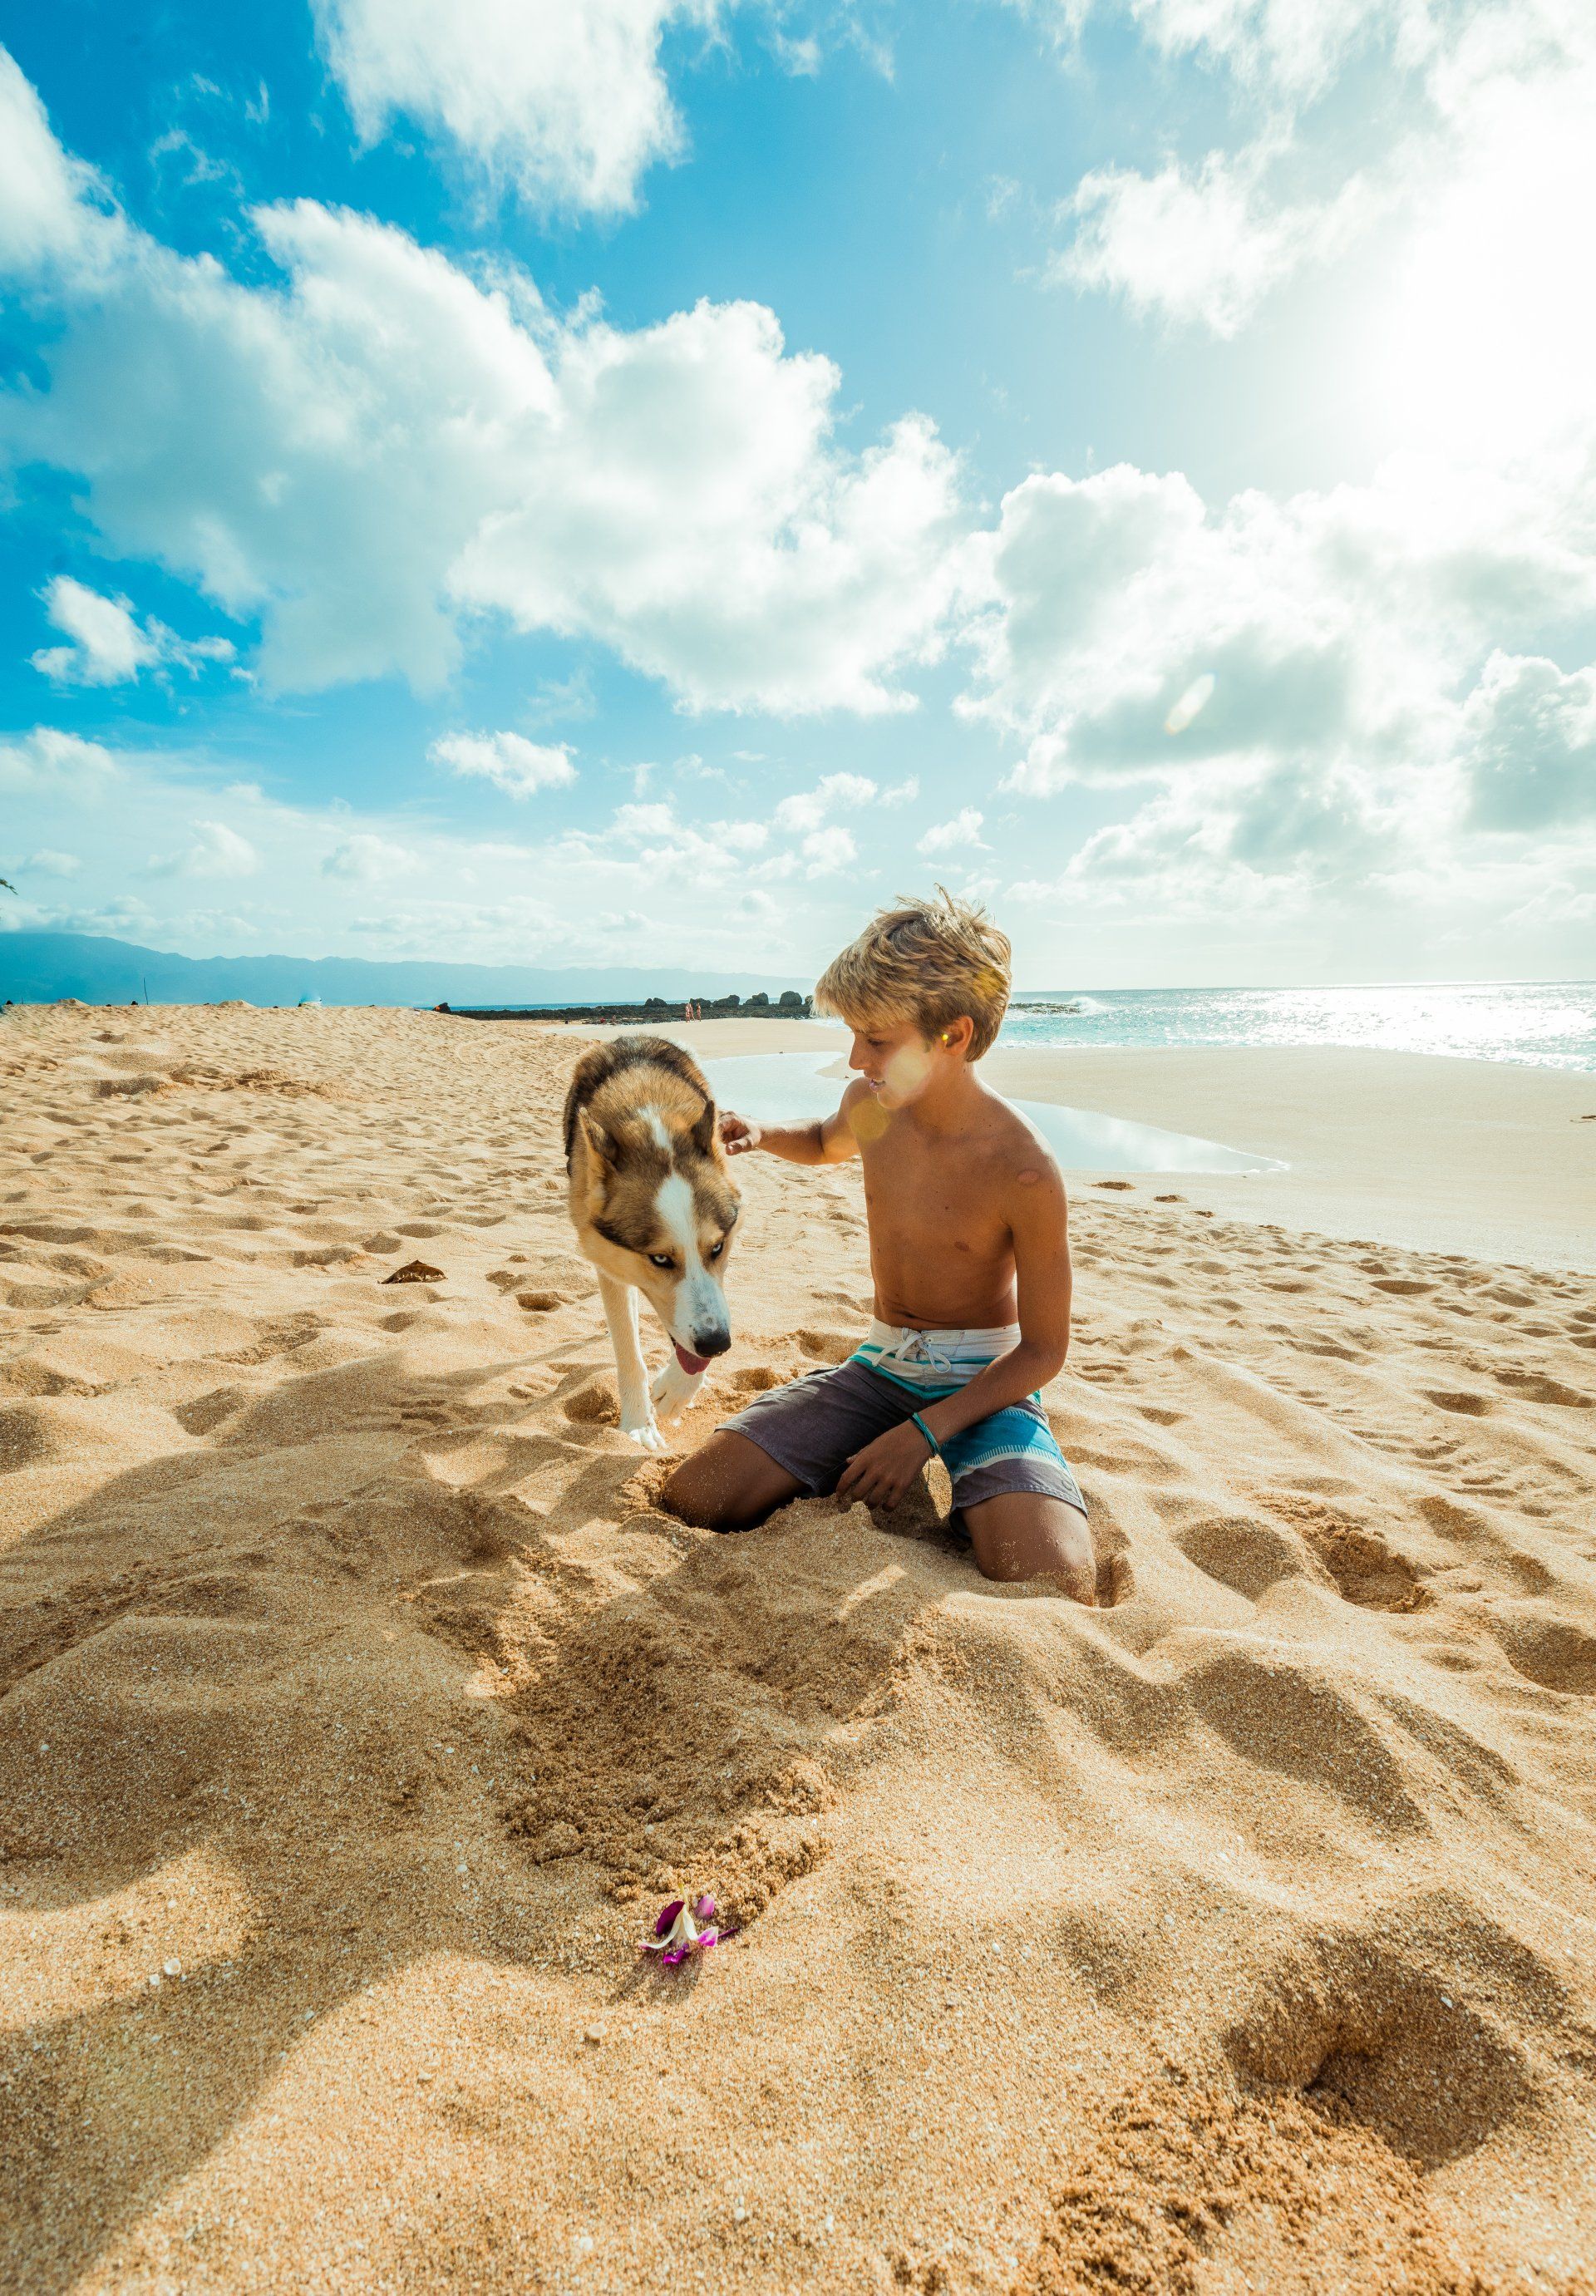 a young boy is playing with a dog on the beach .